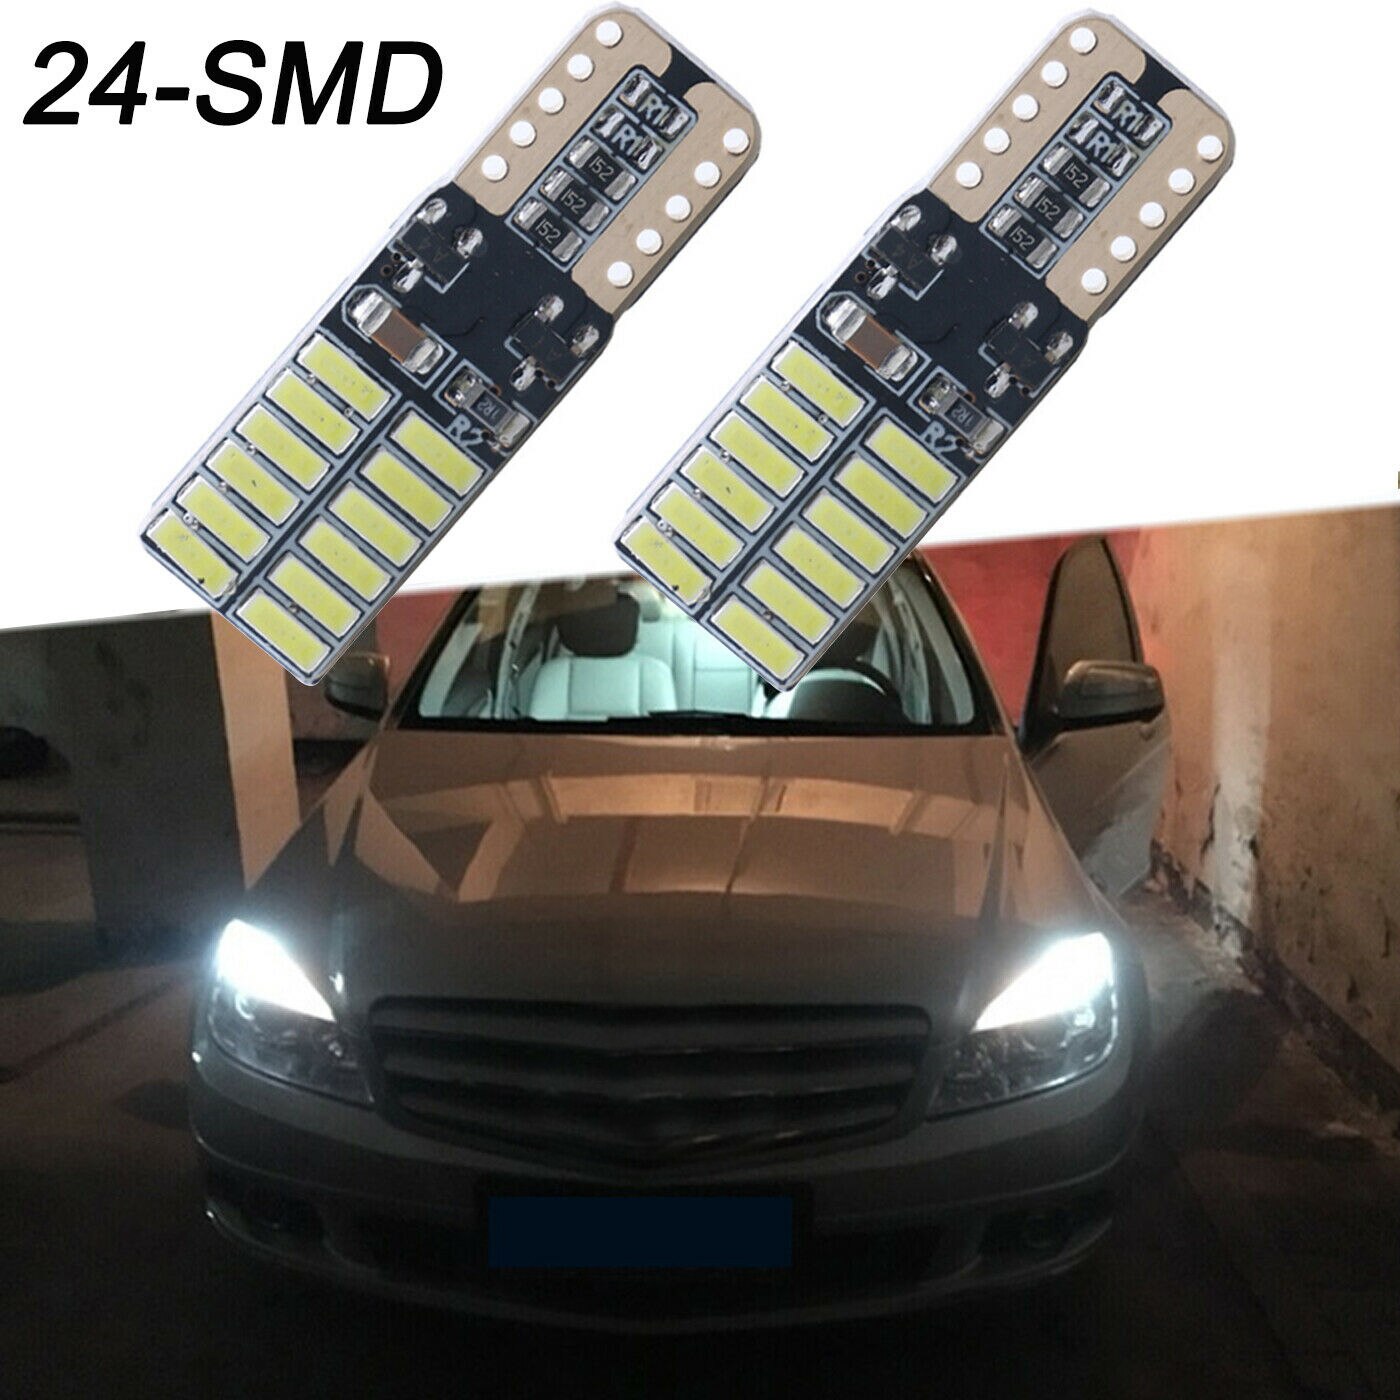 Lamp Led Verlichting T10 Led Lamp Wit 24-Led Voor Mercedes-Benz W204 Xenon